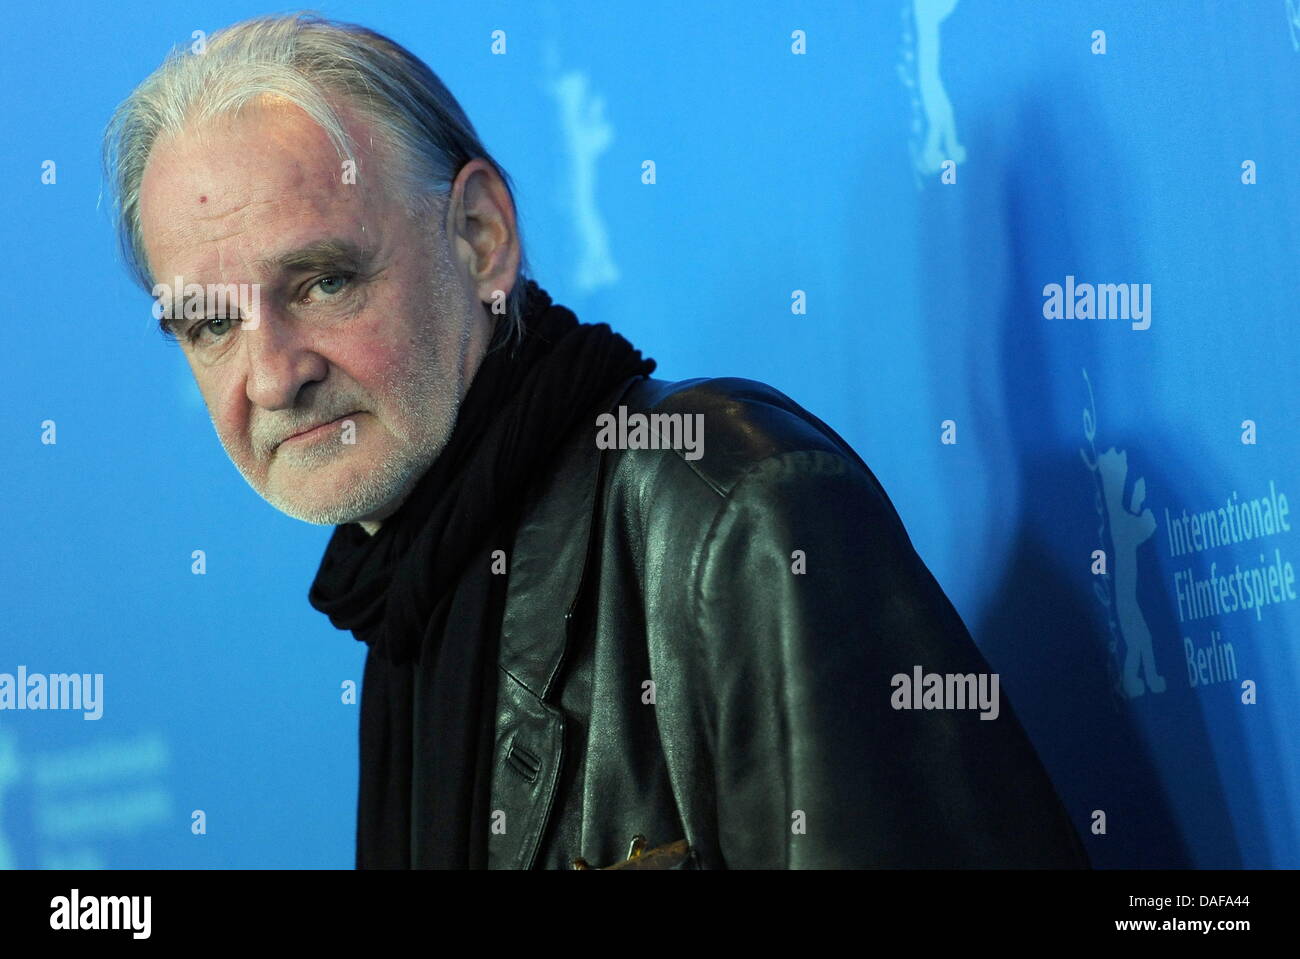 Hungarian director Bela Tarr poses during the photocall for the film 'The Turin Horse' ('A torinoi lo') during the 61st Berlin International Film Festival in Berlin, Germany, 15 February 2011. The film is running in the competition program section of the International Film Festival. The 61st Berlinale takes place from 10 to 20 February 2011. Photo: Britta Pedersen Stock Photo